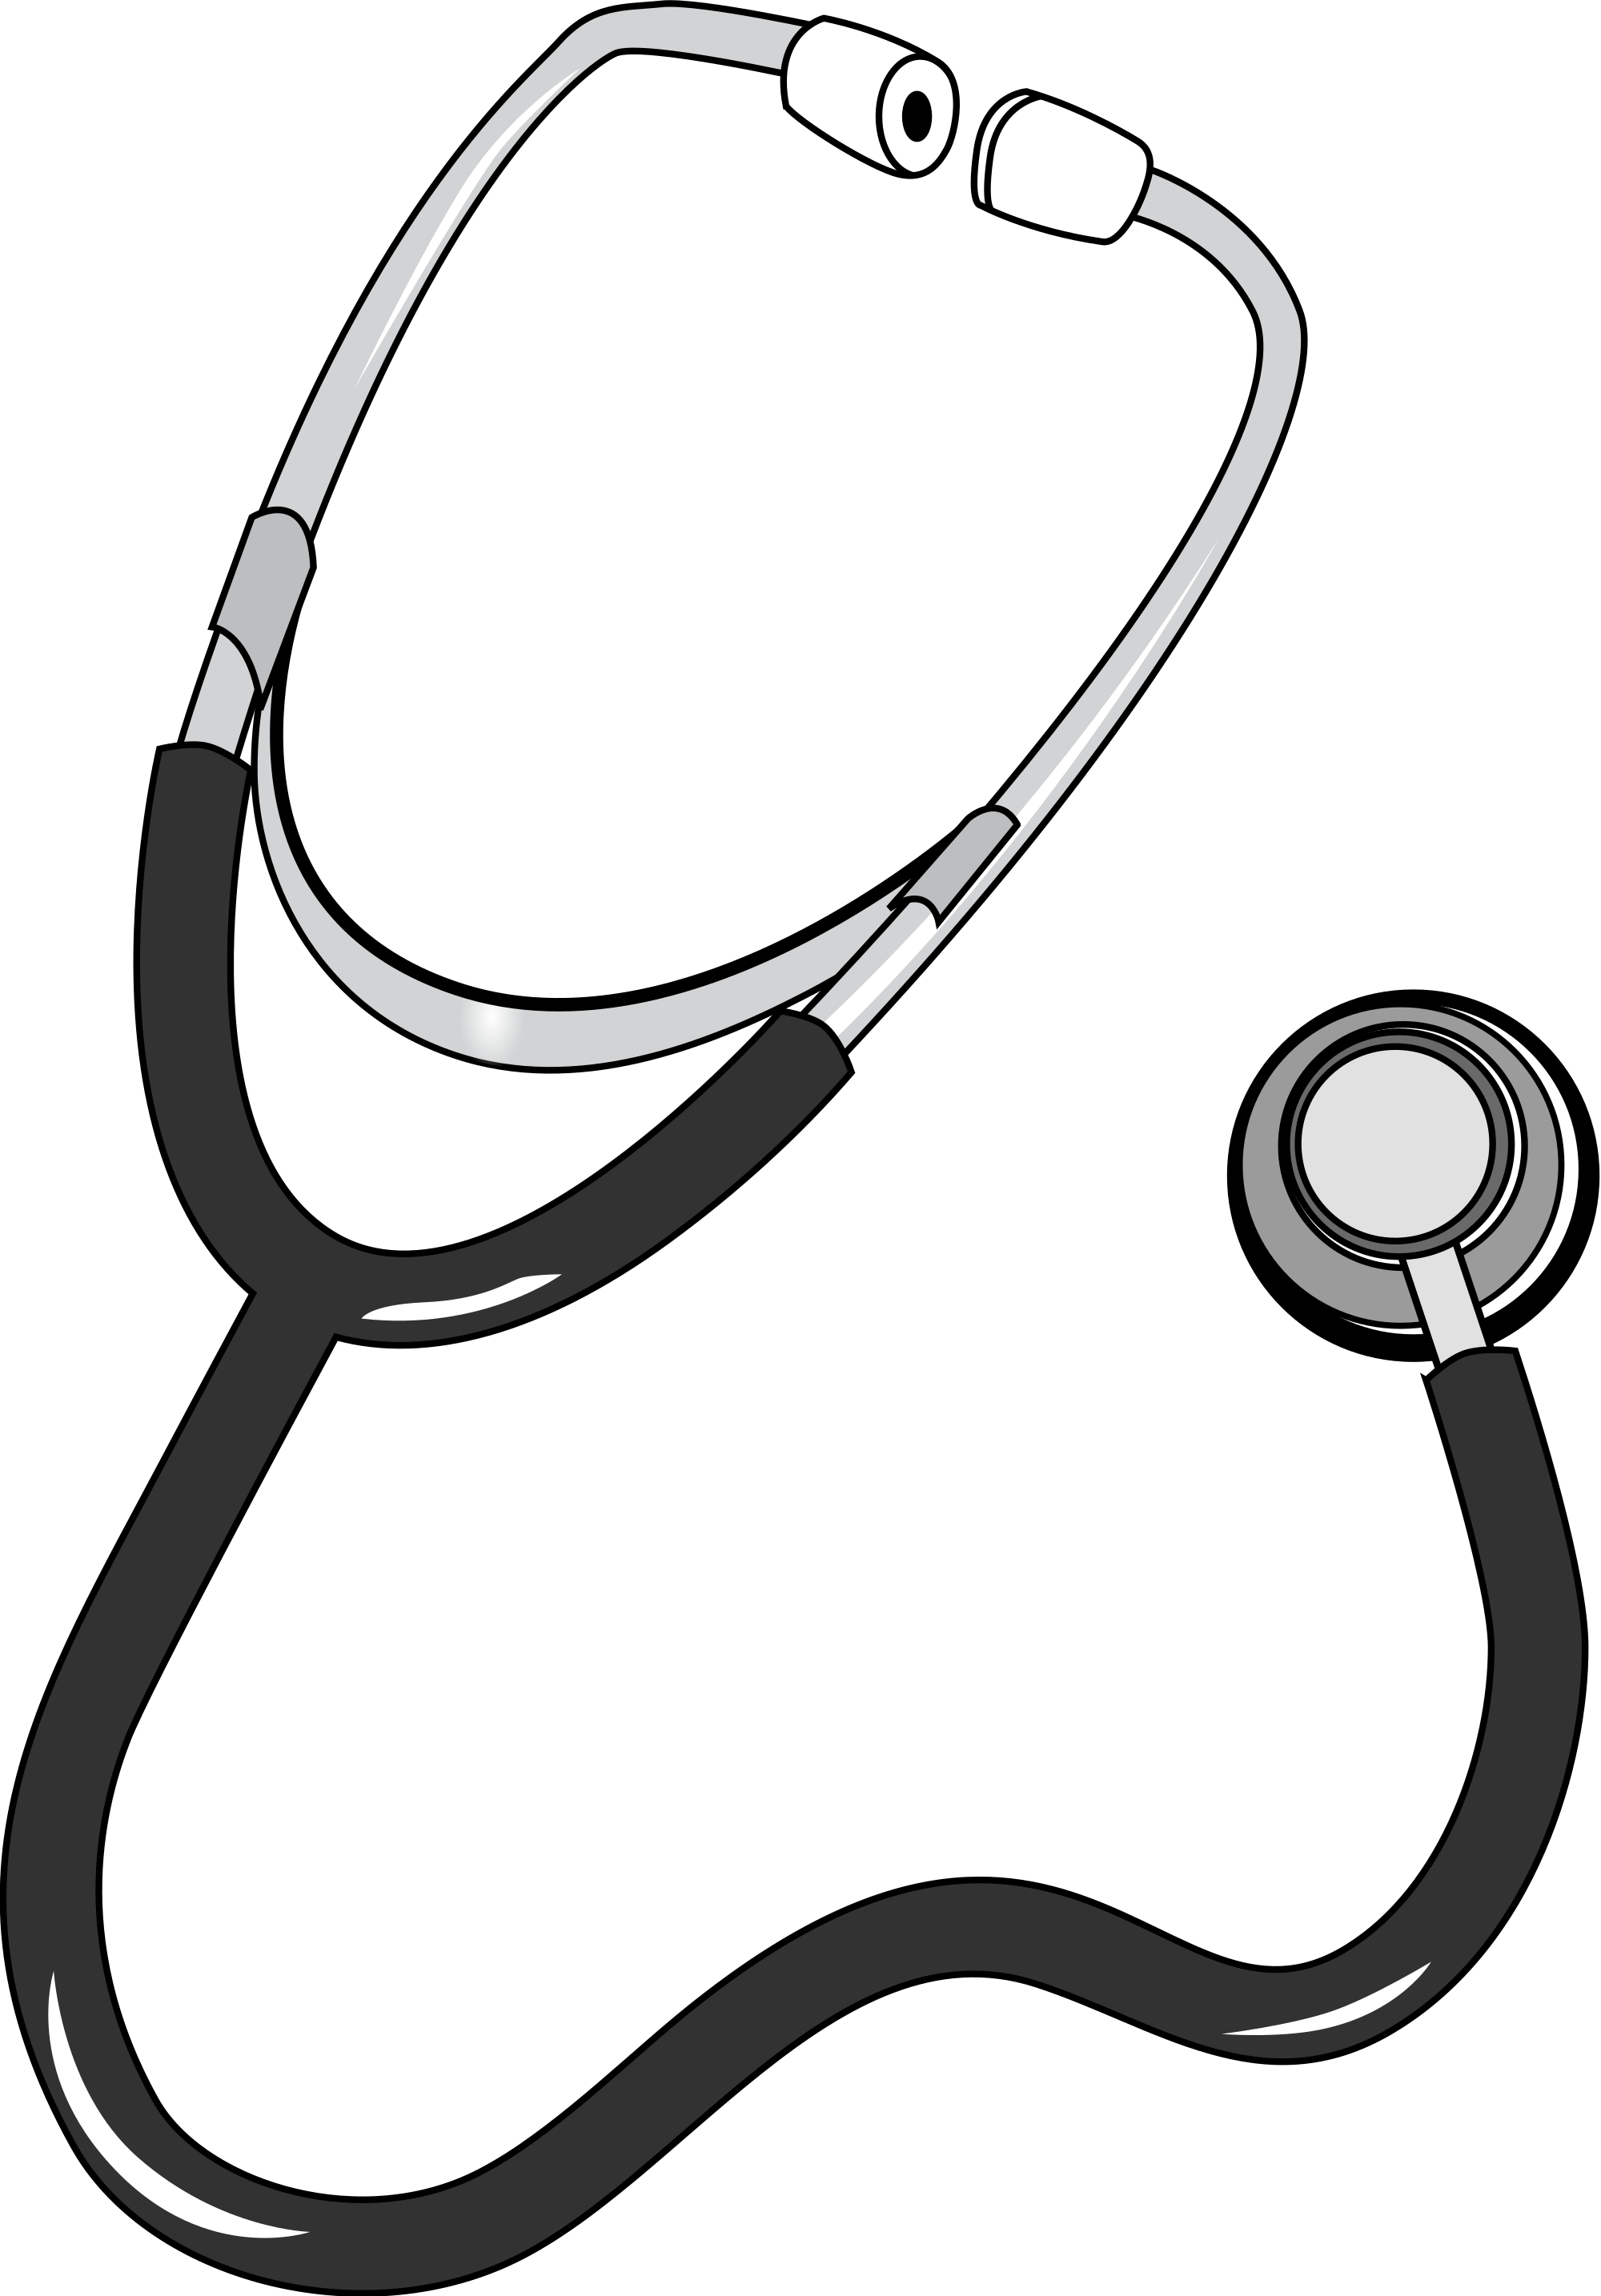 File:Stethoscope with binaural spring.svg - Wikimedia Commons